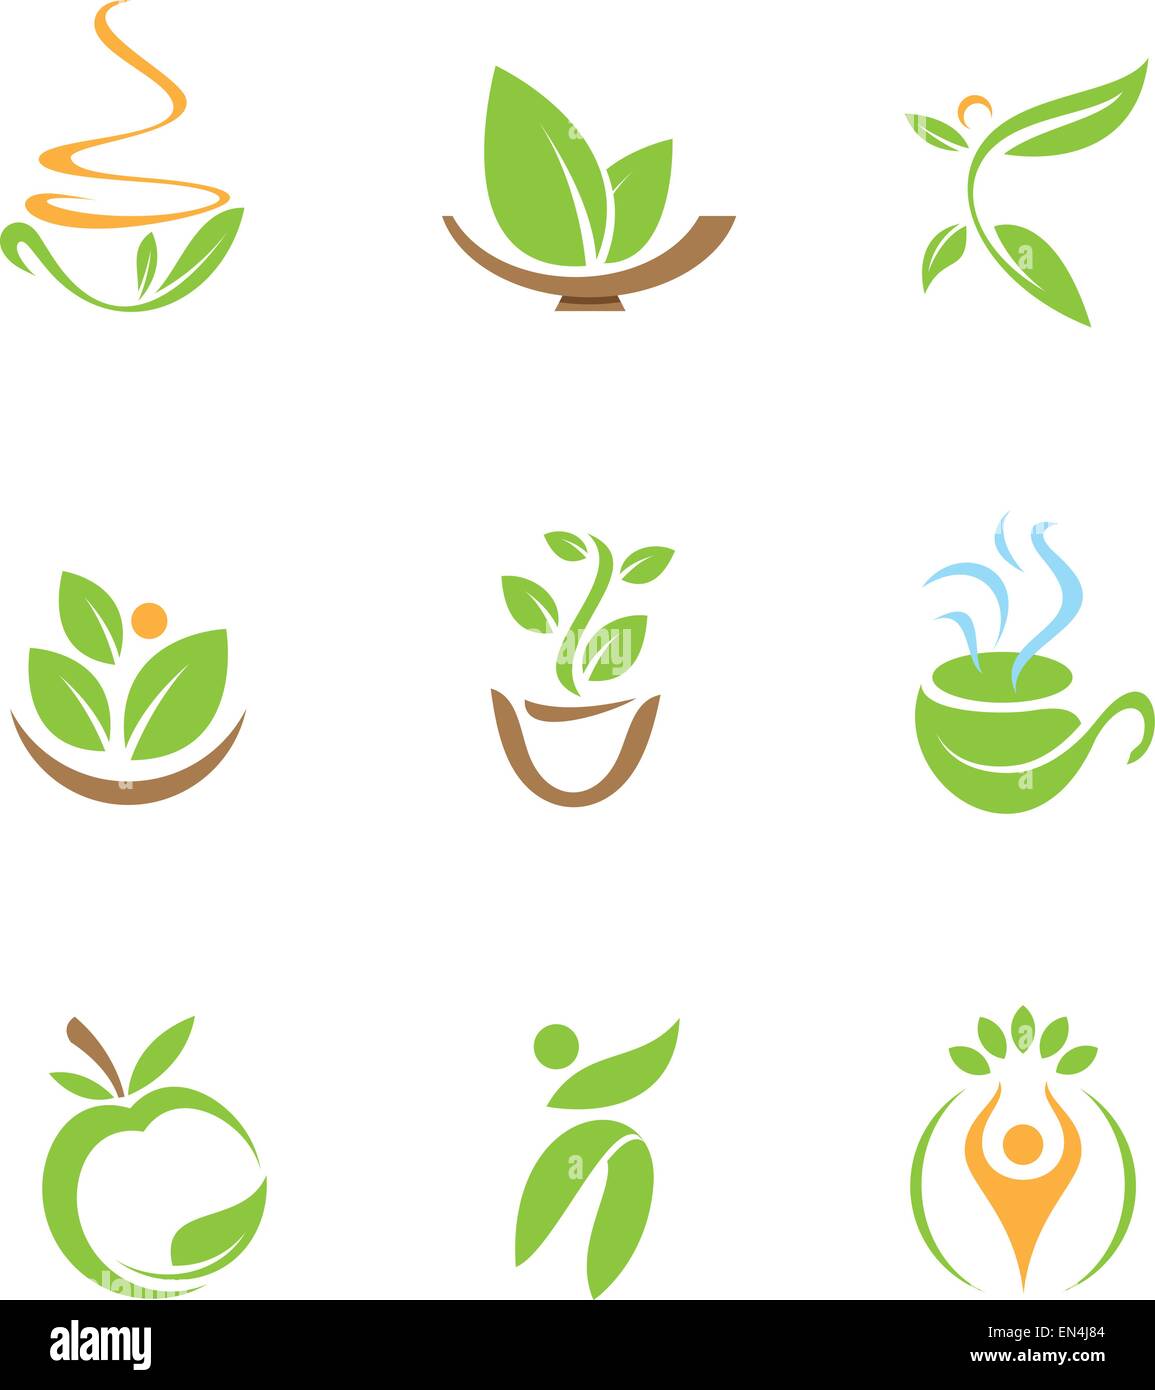 healthy food logo and icon Stock Vector